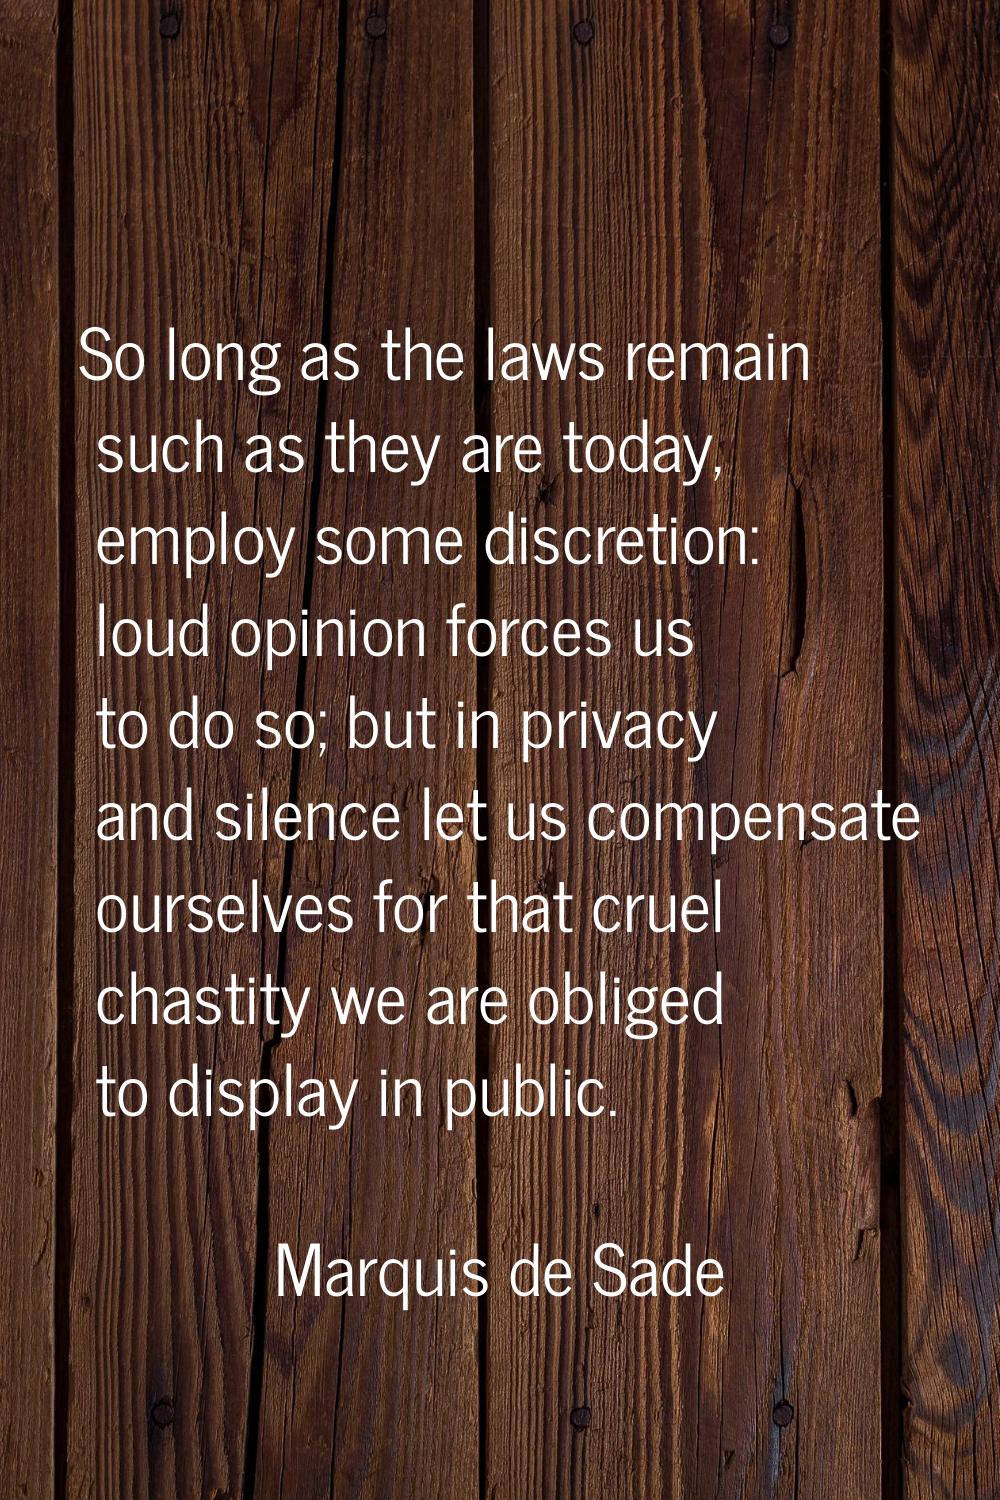 So long as the laws remain such as they are today, employ some discretion: loud opinion forces us t